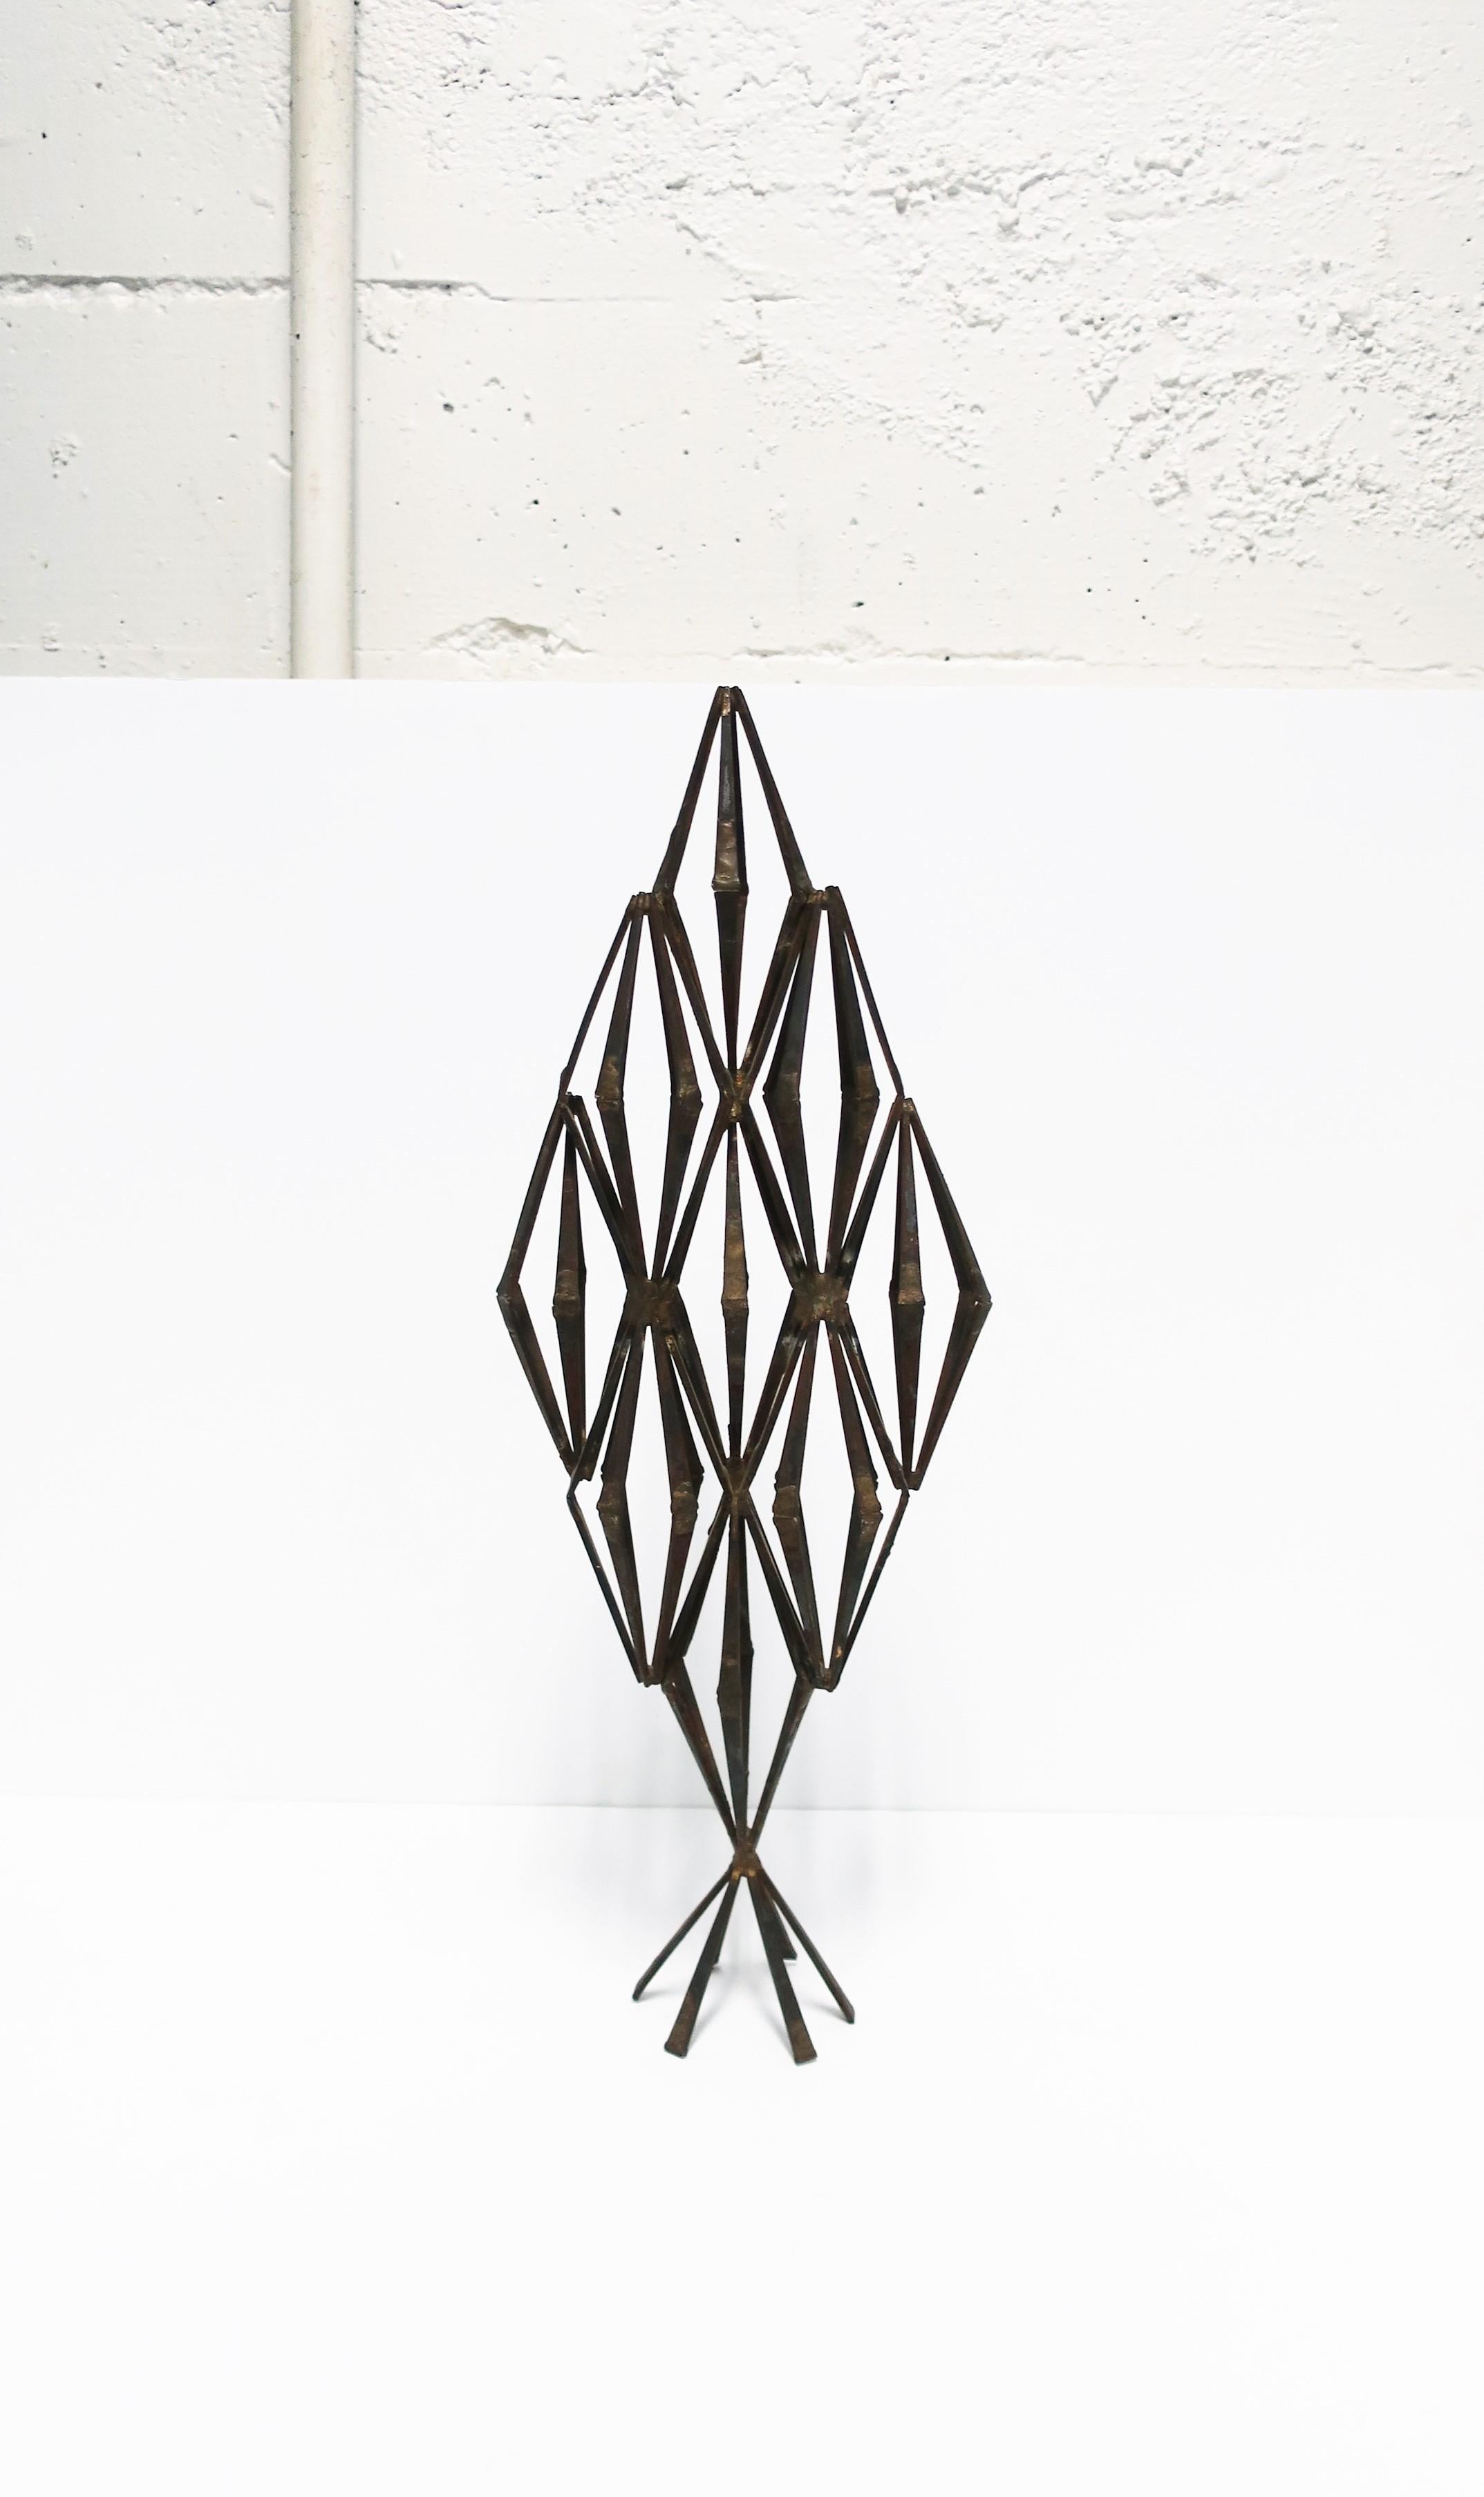 A hand-made brutalist metal sculpture piece in a marque shape, circa late-20th century. Sculpture is relatively tall made of iron metal with an intentional weathered look giving it a bronzed hue. Dimensions: 3.75